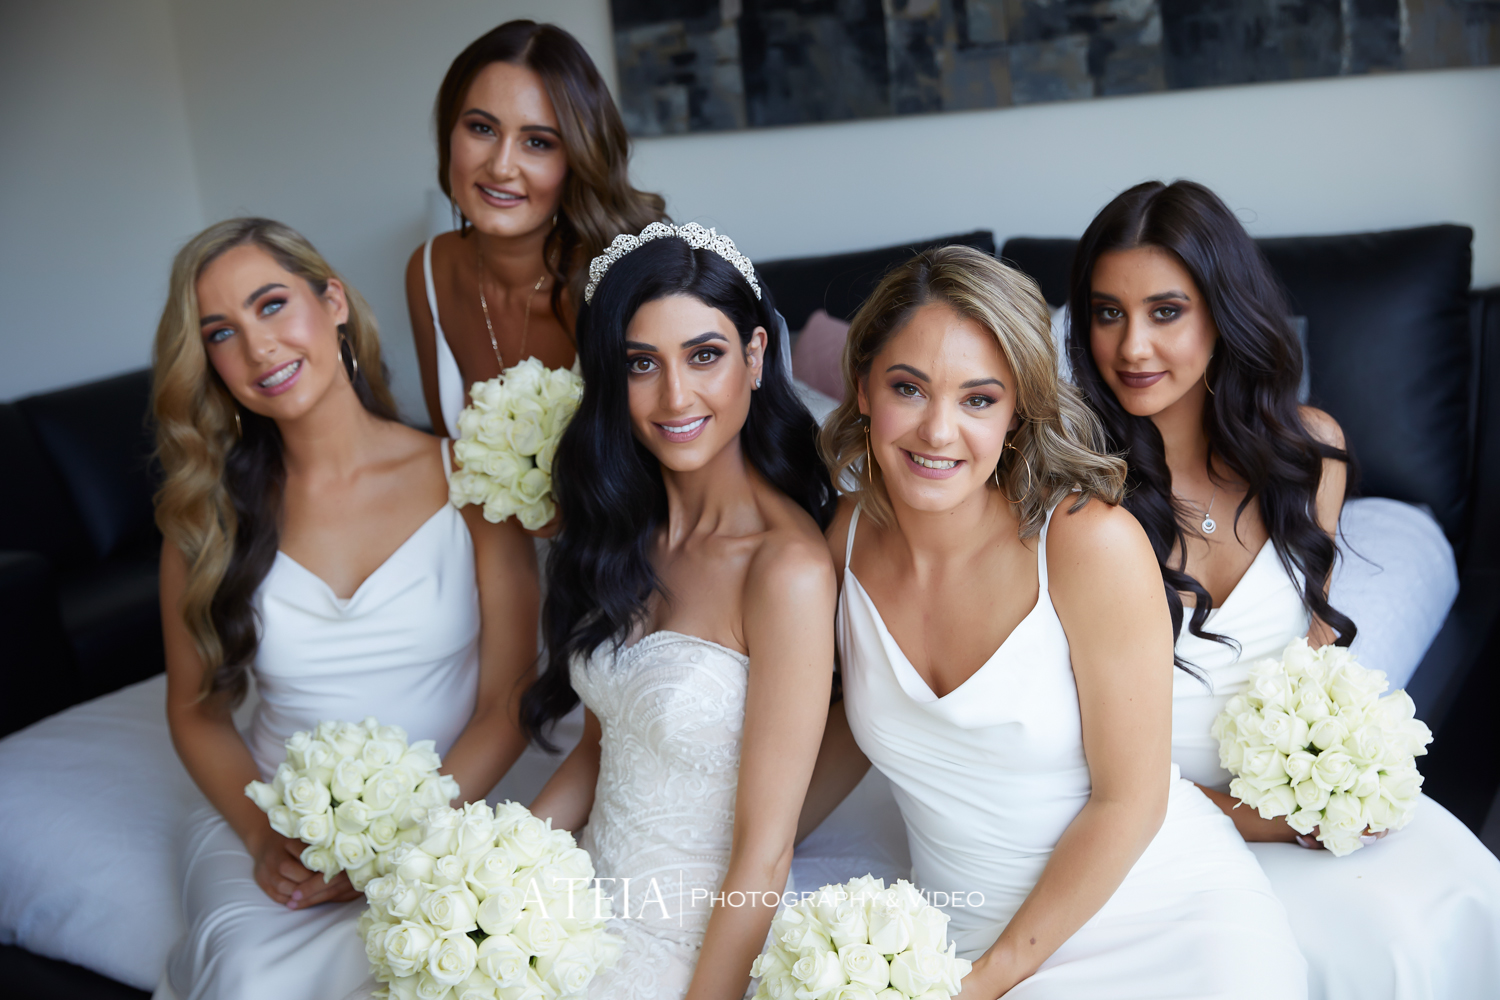 , Merrimu Receptions Wedding Photography Melbourne by ATEIA Photography &#038; Video